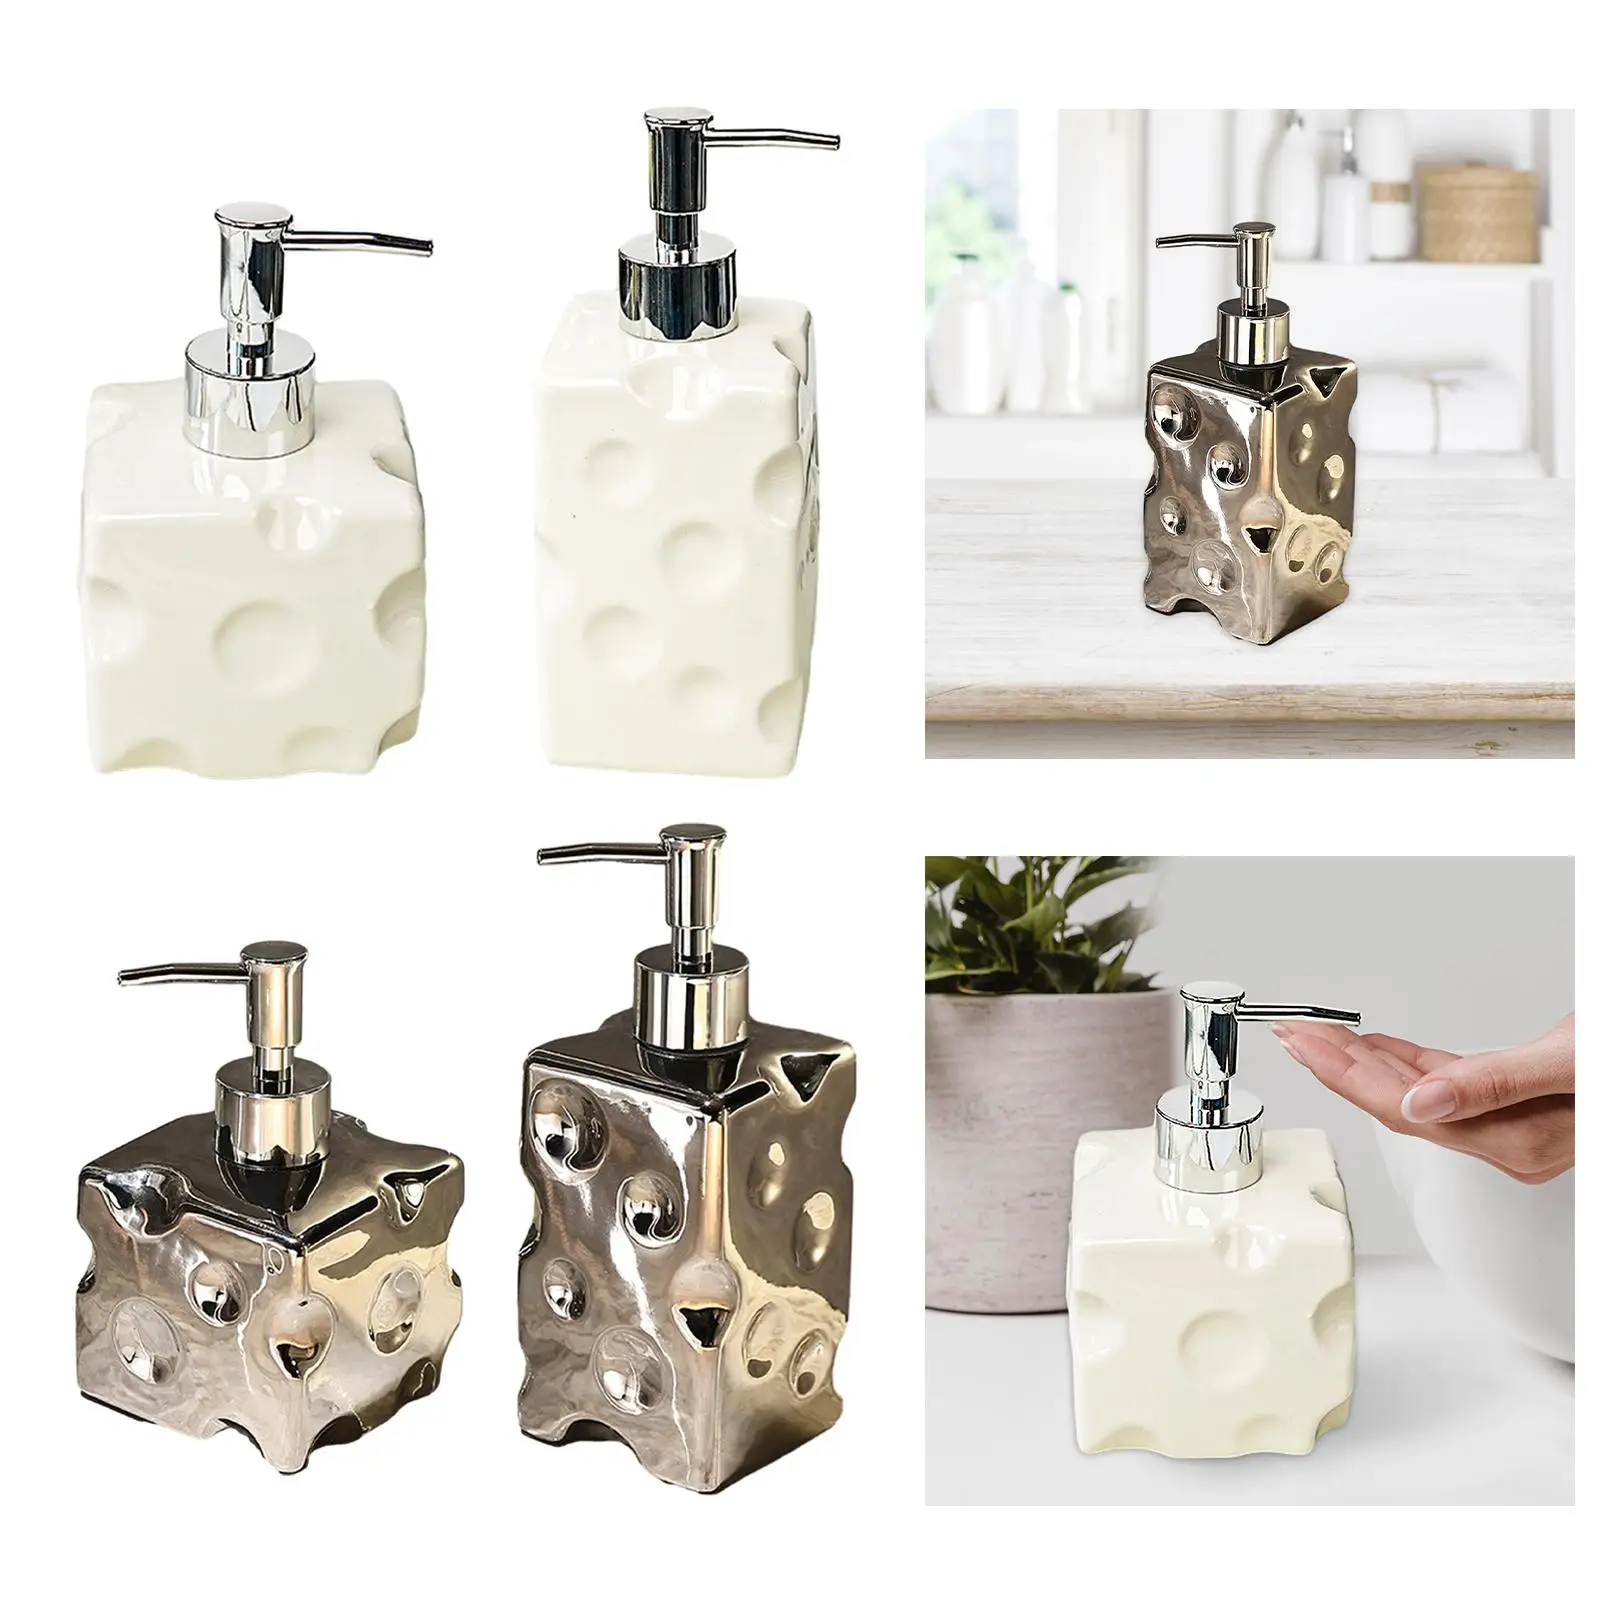 Hand Soap Liquid Dispenser Portable Easy to Fill Refillable Pump Soap Container for Washroom Vanity Hotel Countertop Kitchen